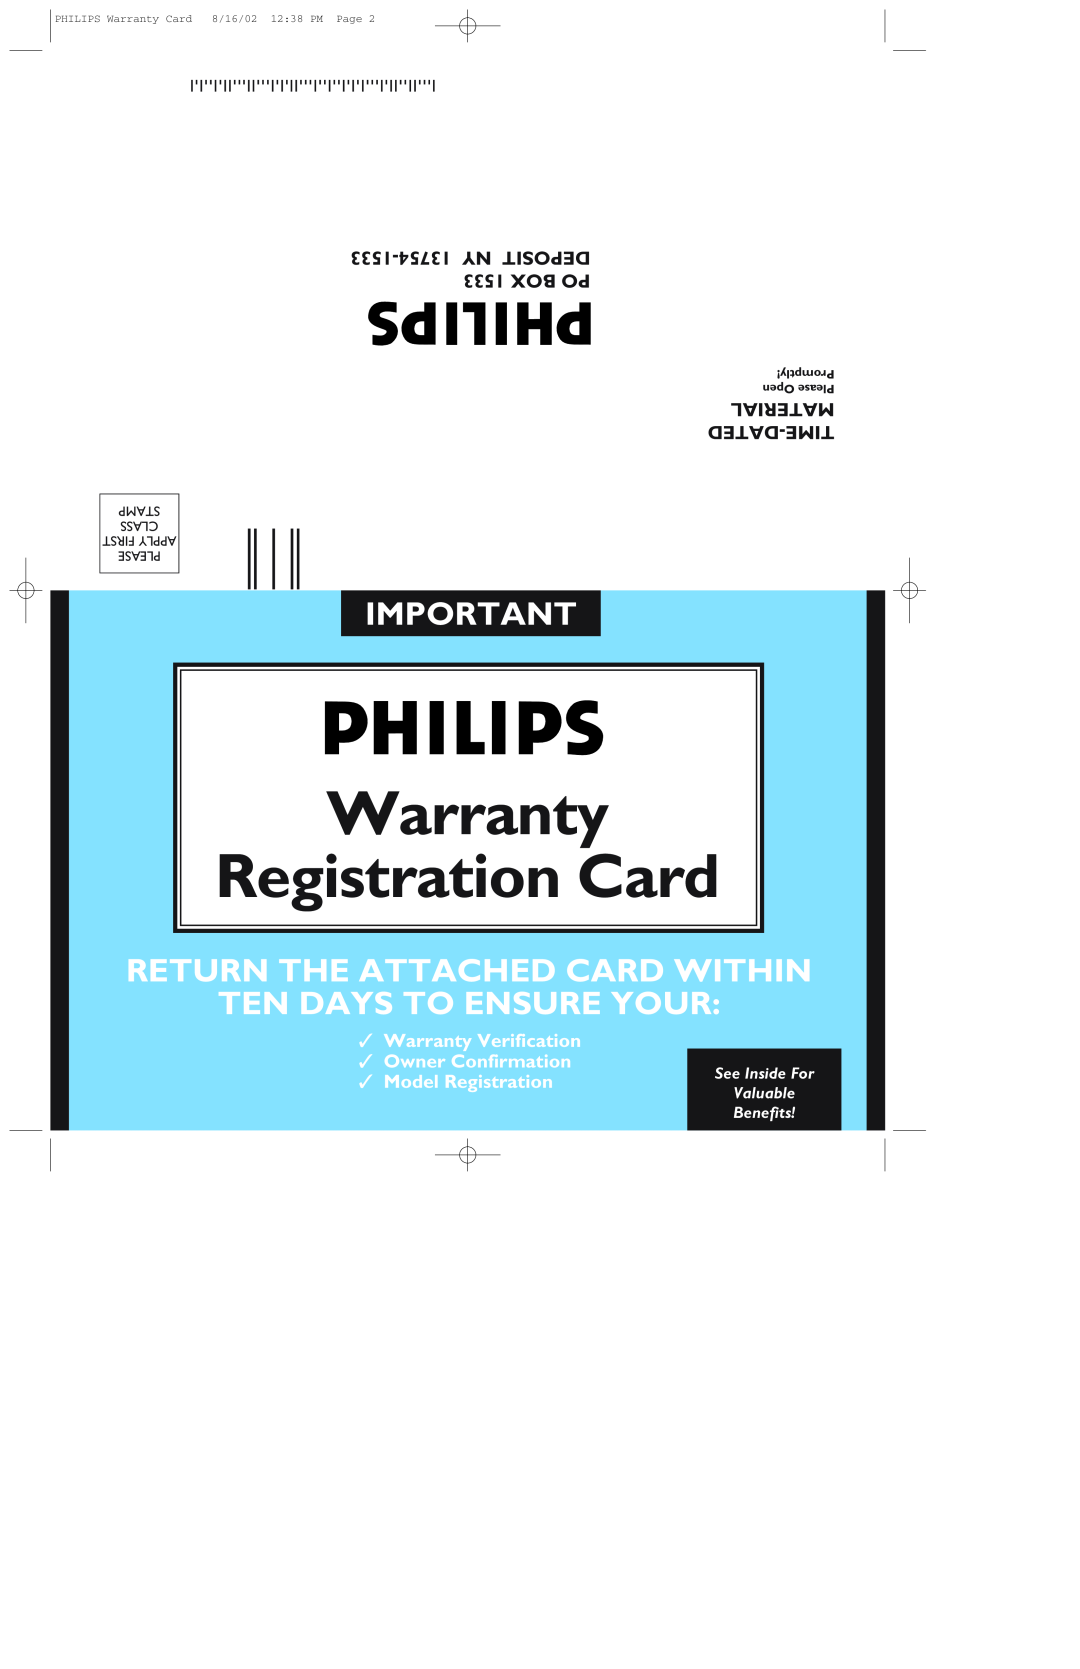 Philips 107C6 1533-13754NY DEPOSIT, Box Po, Material, Dated-Time, Warranty, Registration Card, Ten Days To Ensure Your 